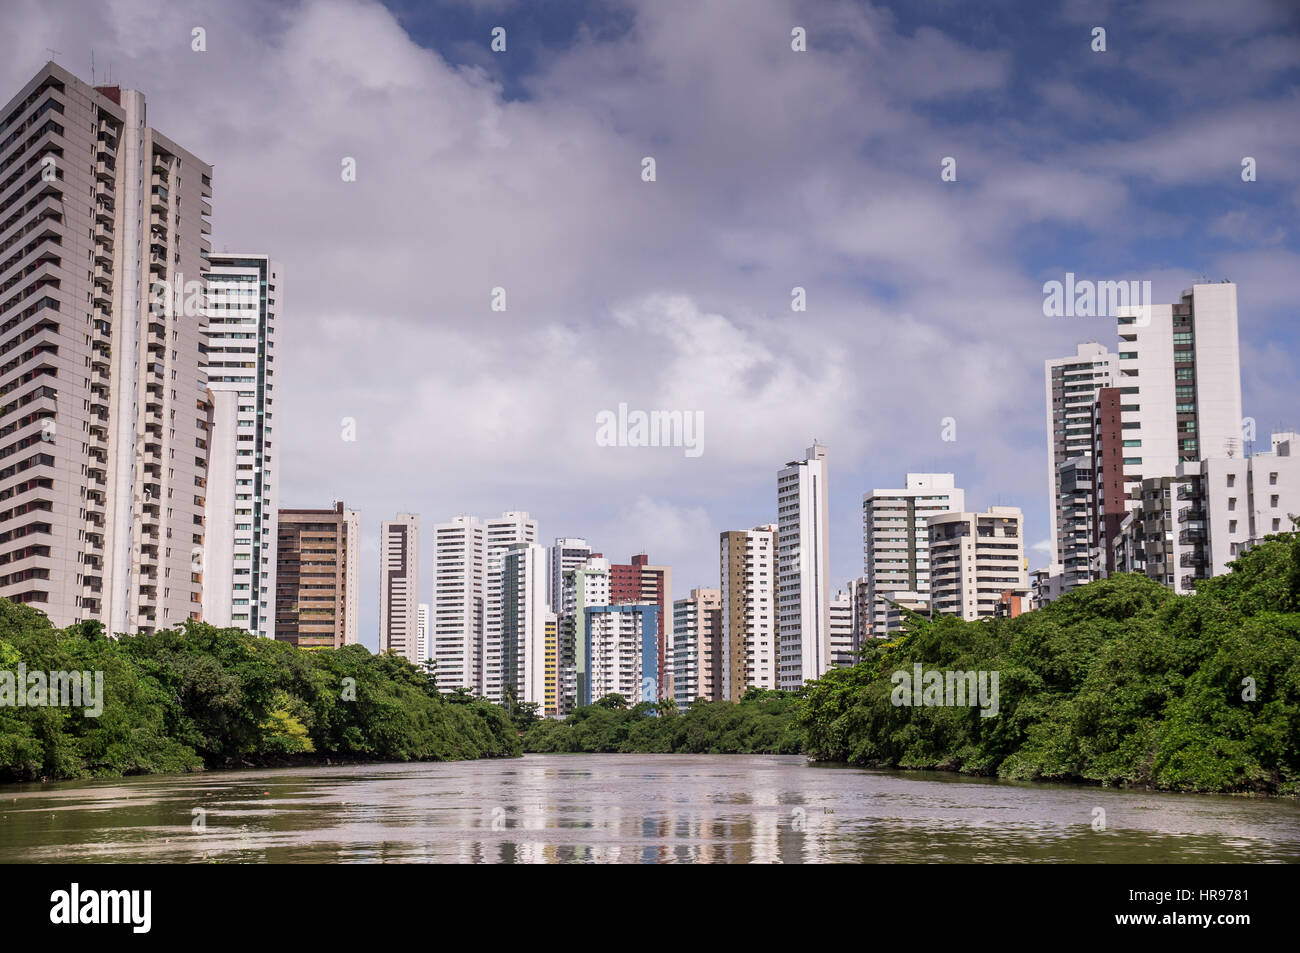 The skyline of Recife in Pernambuco, Brazil seen from river Stock Photo